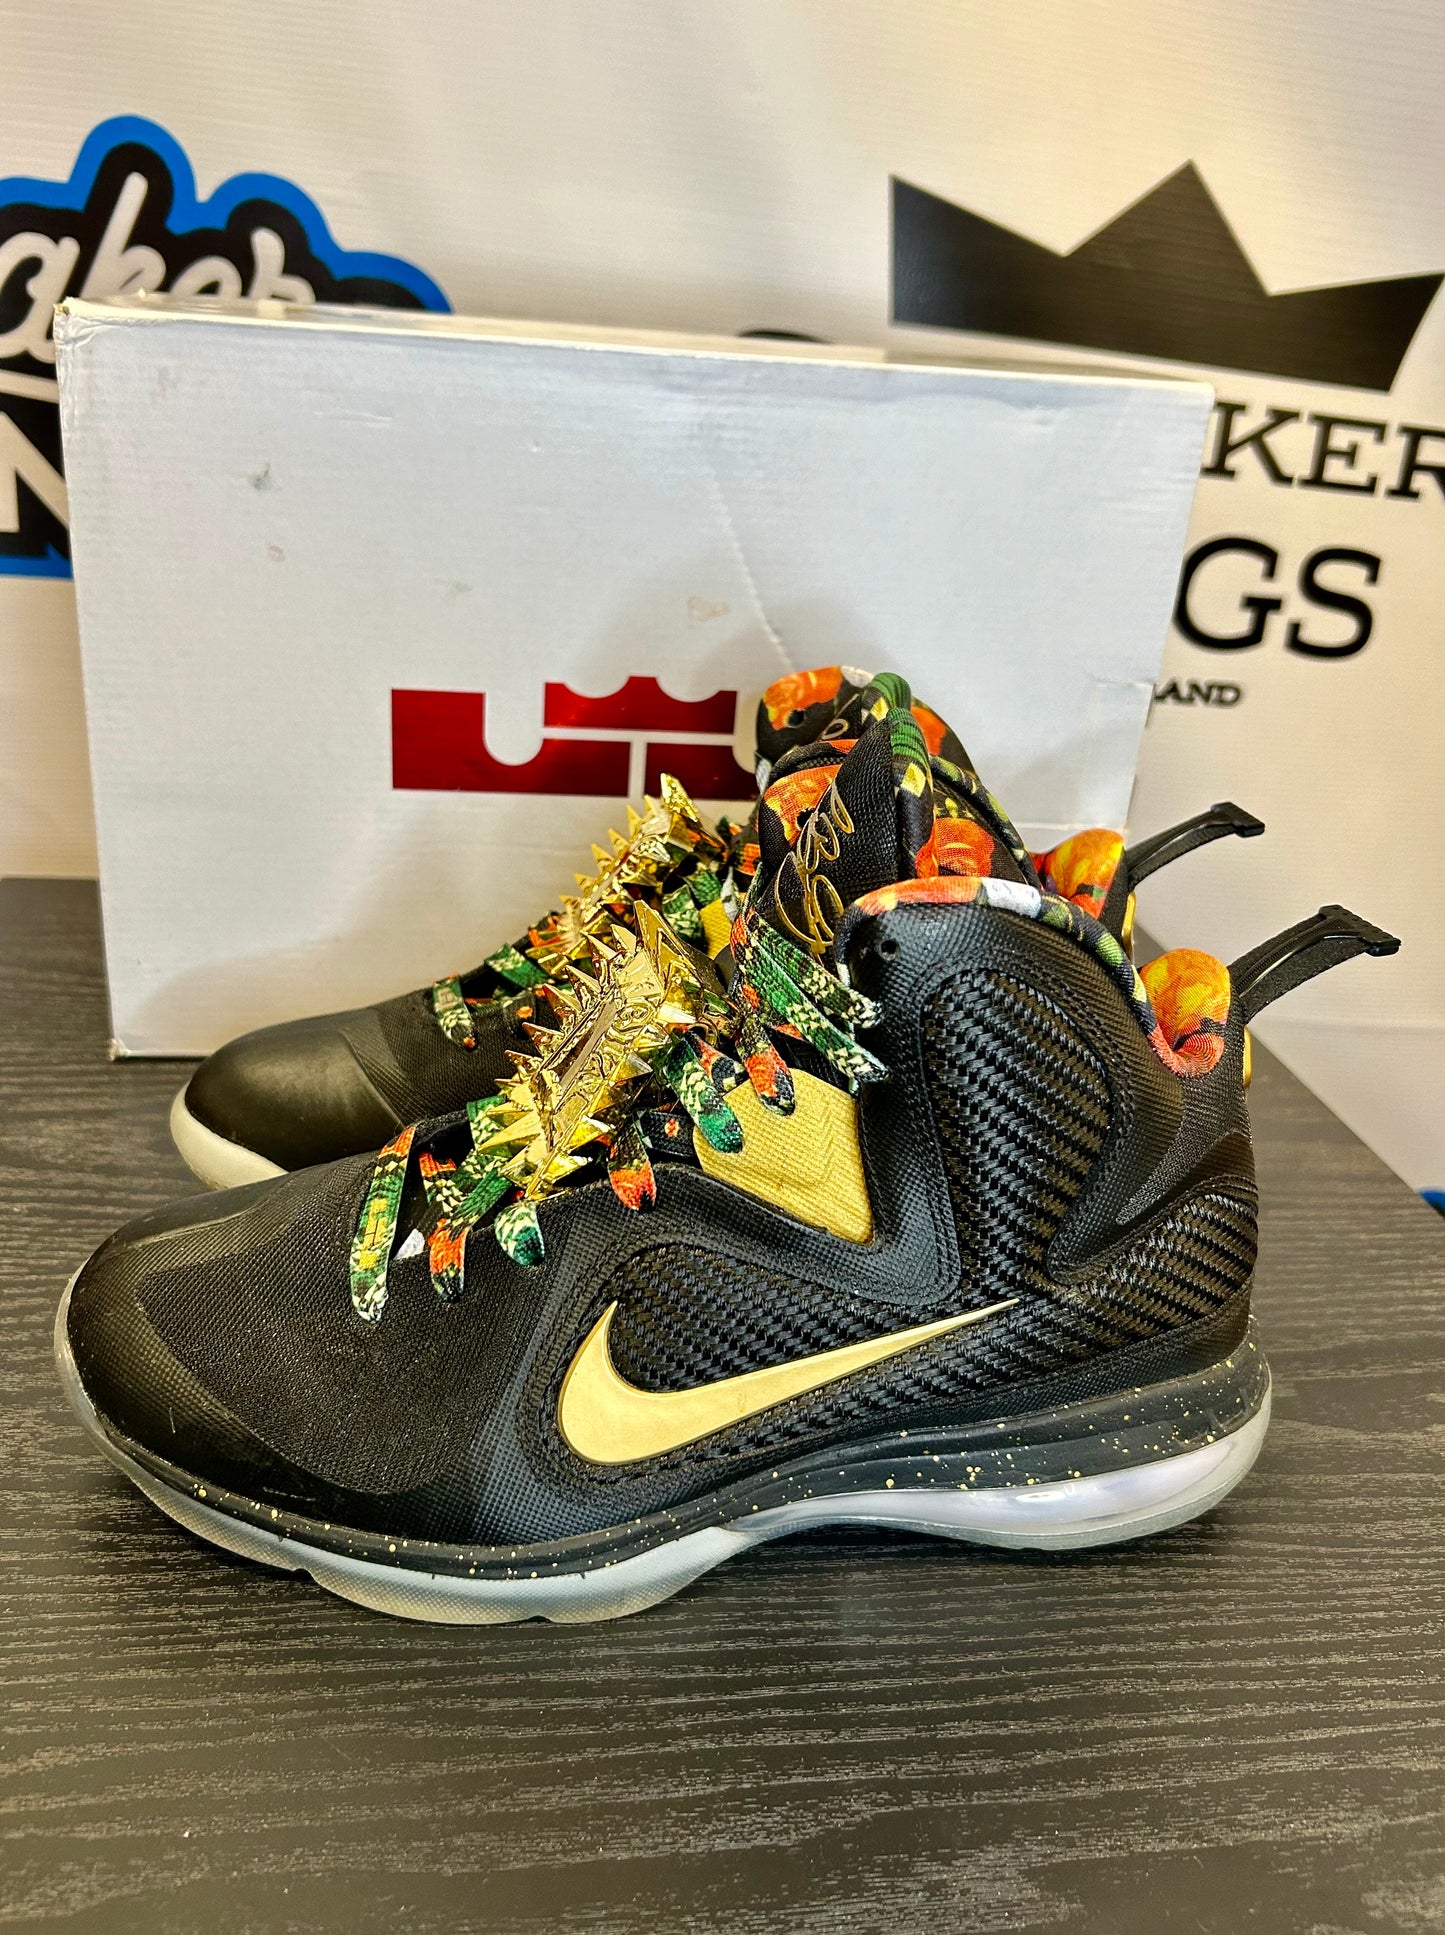 Nike LeBron XI 9 Watch the Throne (Pre-Owned)